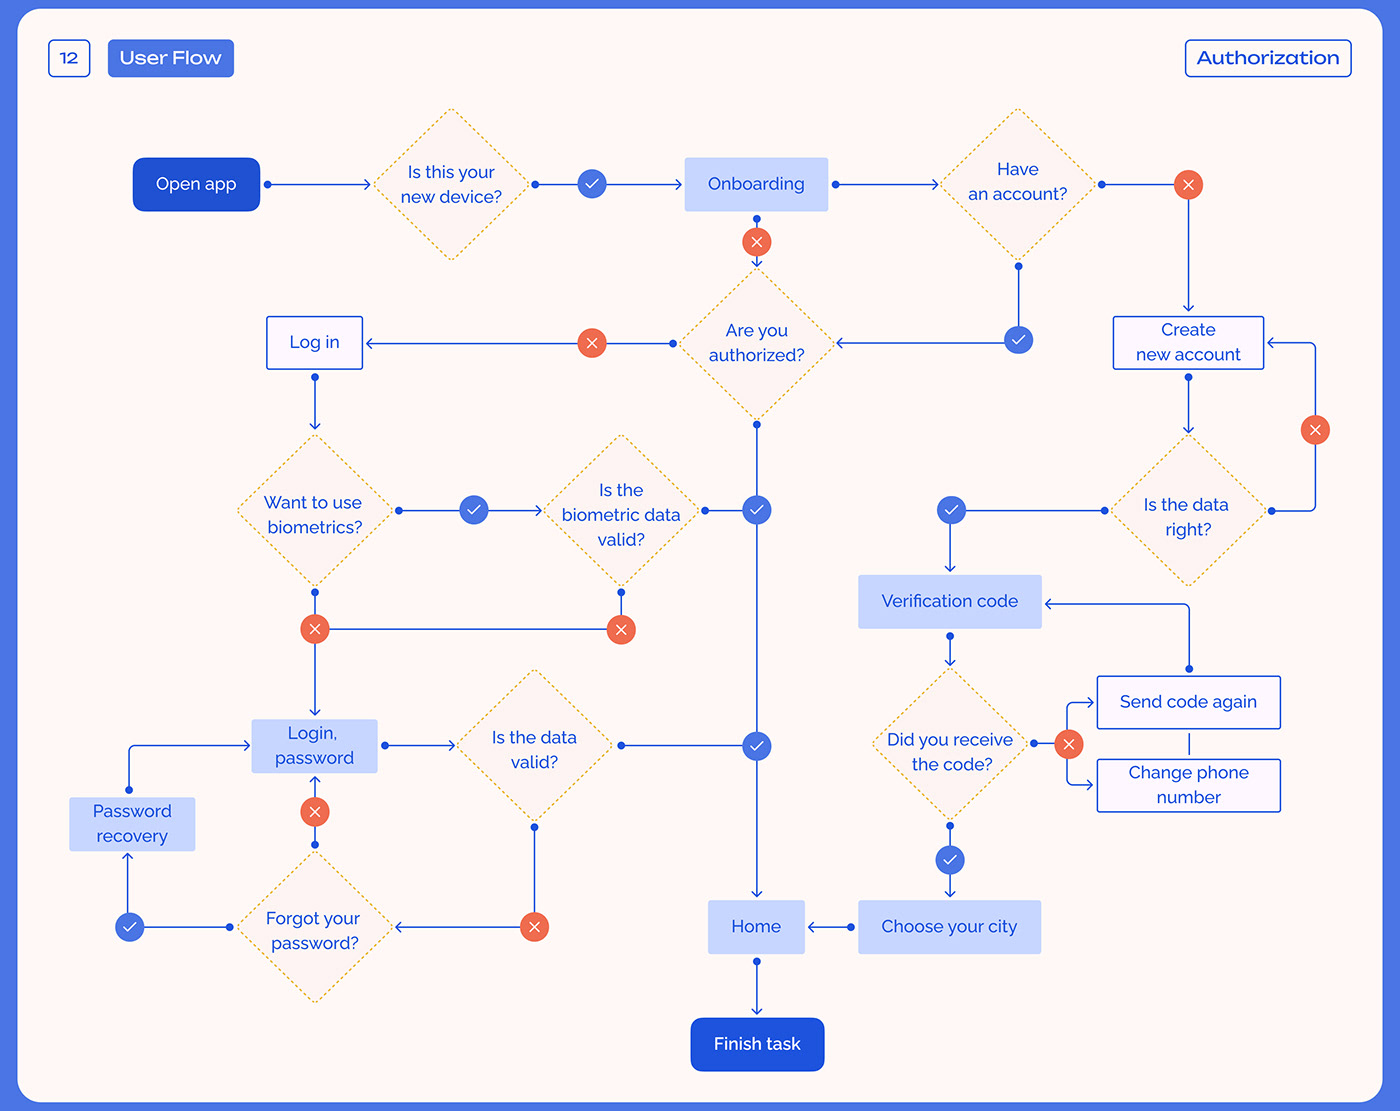 User Flow for authorization process